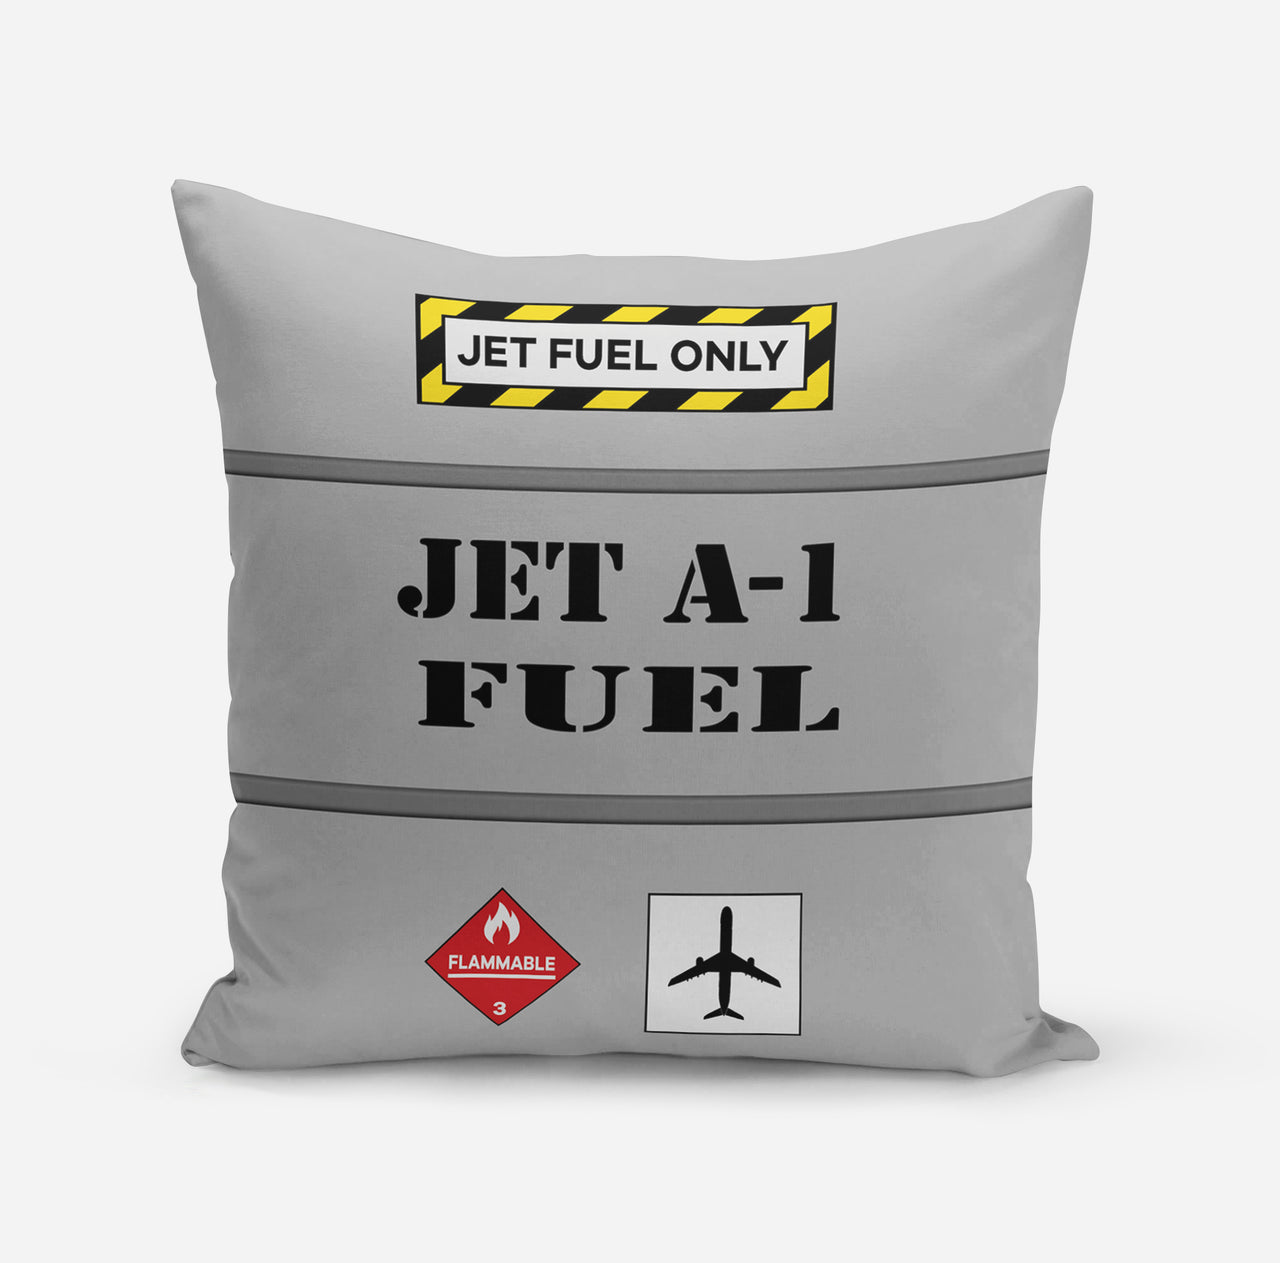 Jet Fuel Only Designed Pillows